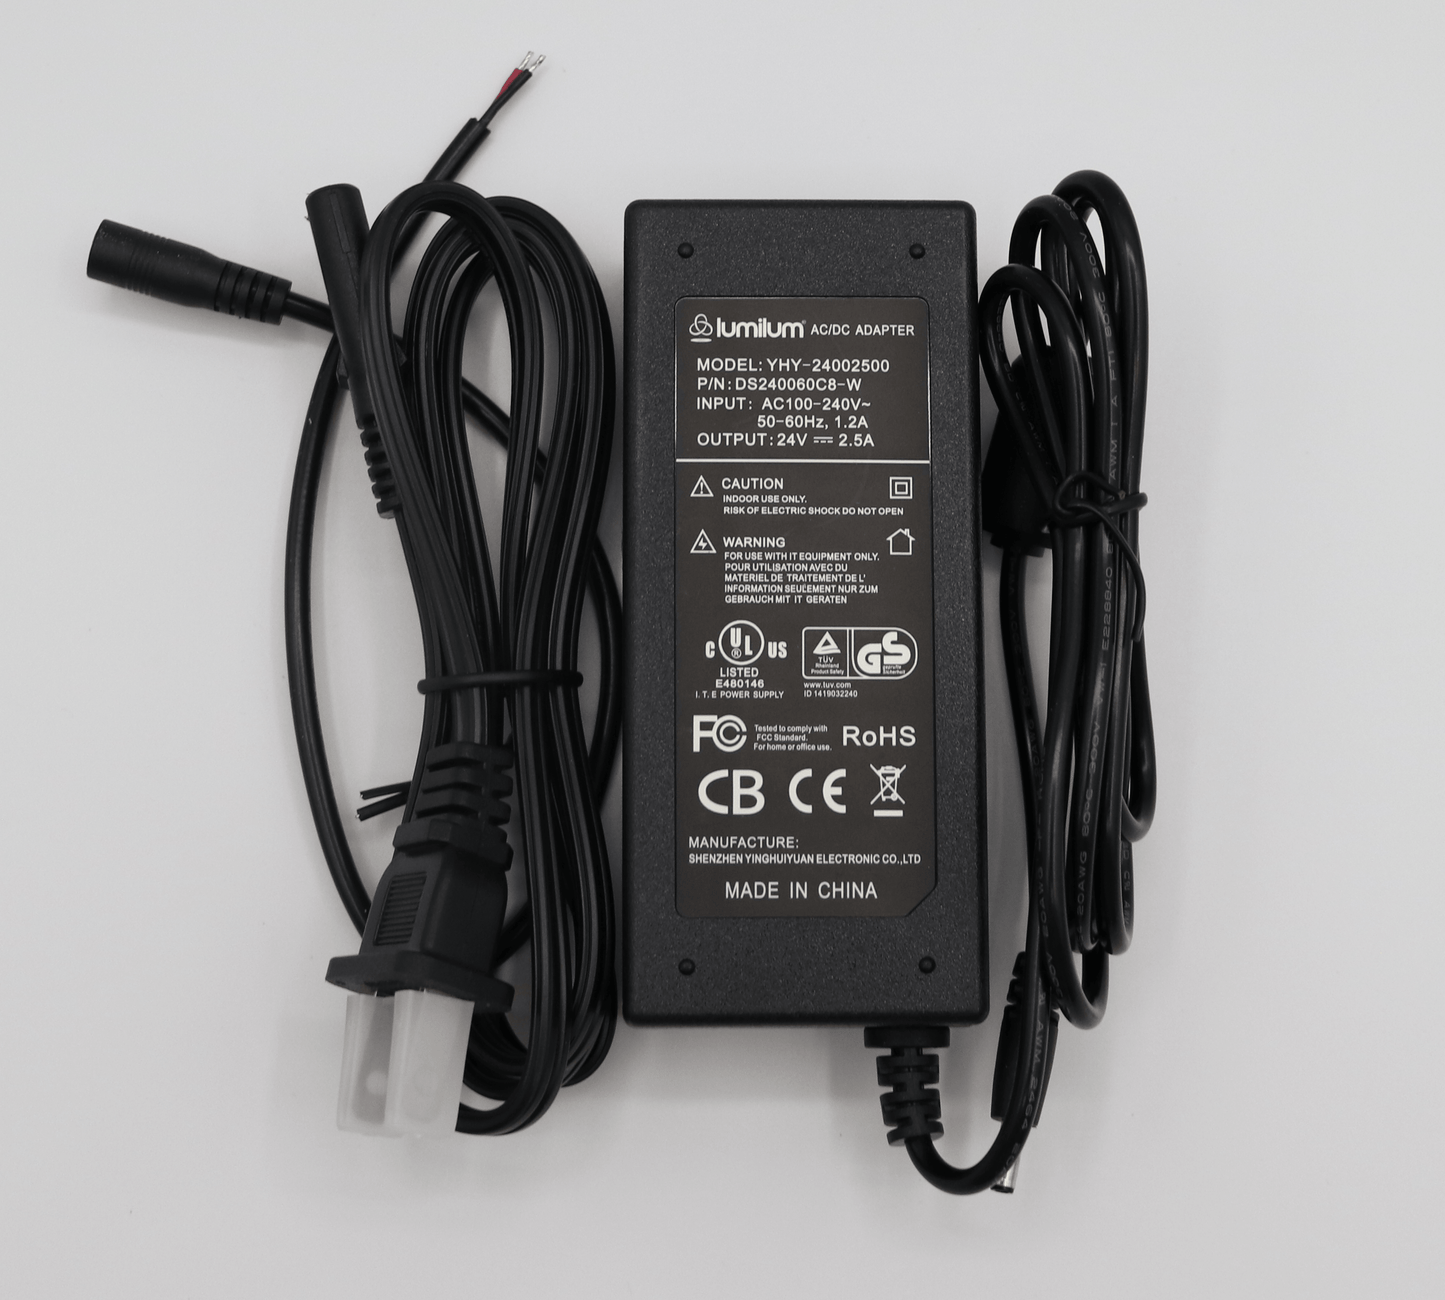 black 60 watt led light adapter with cables